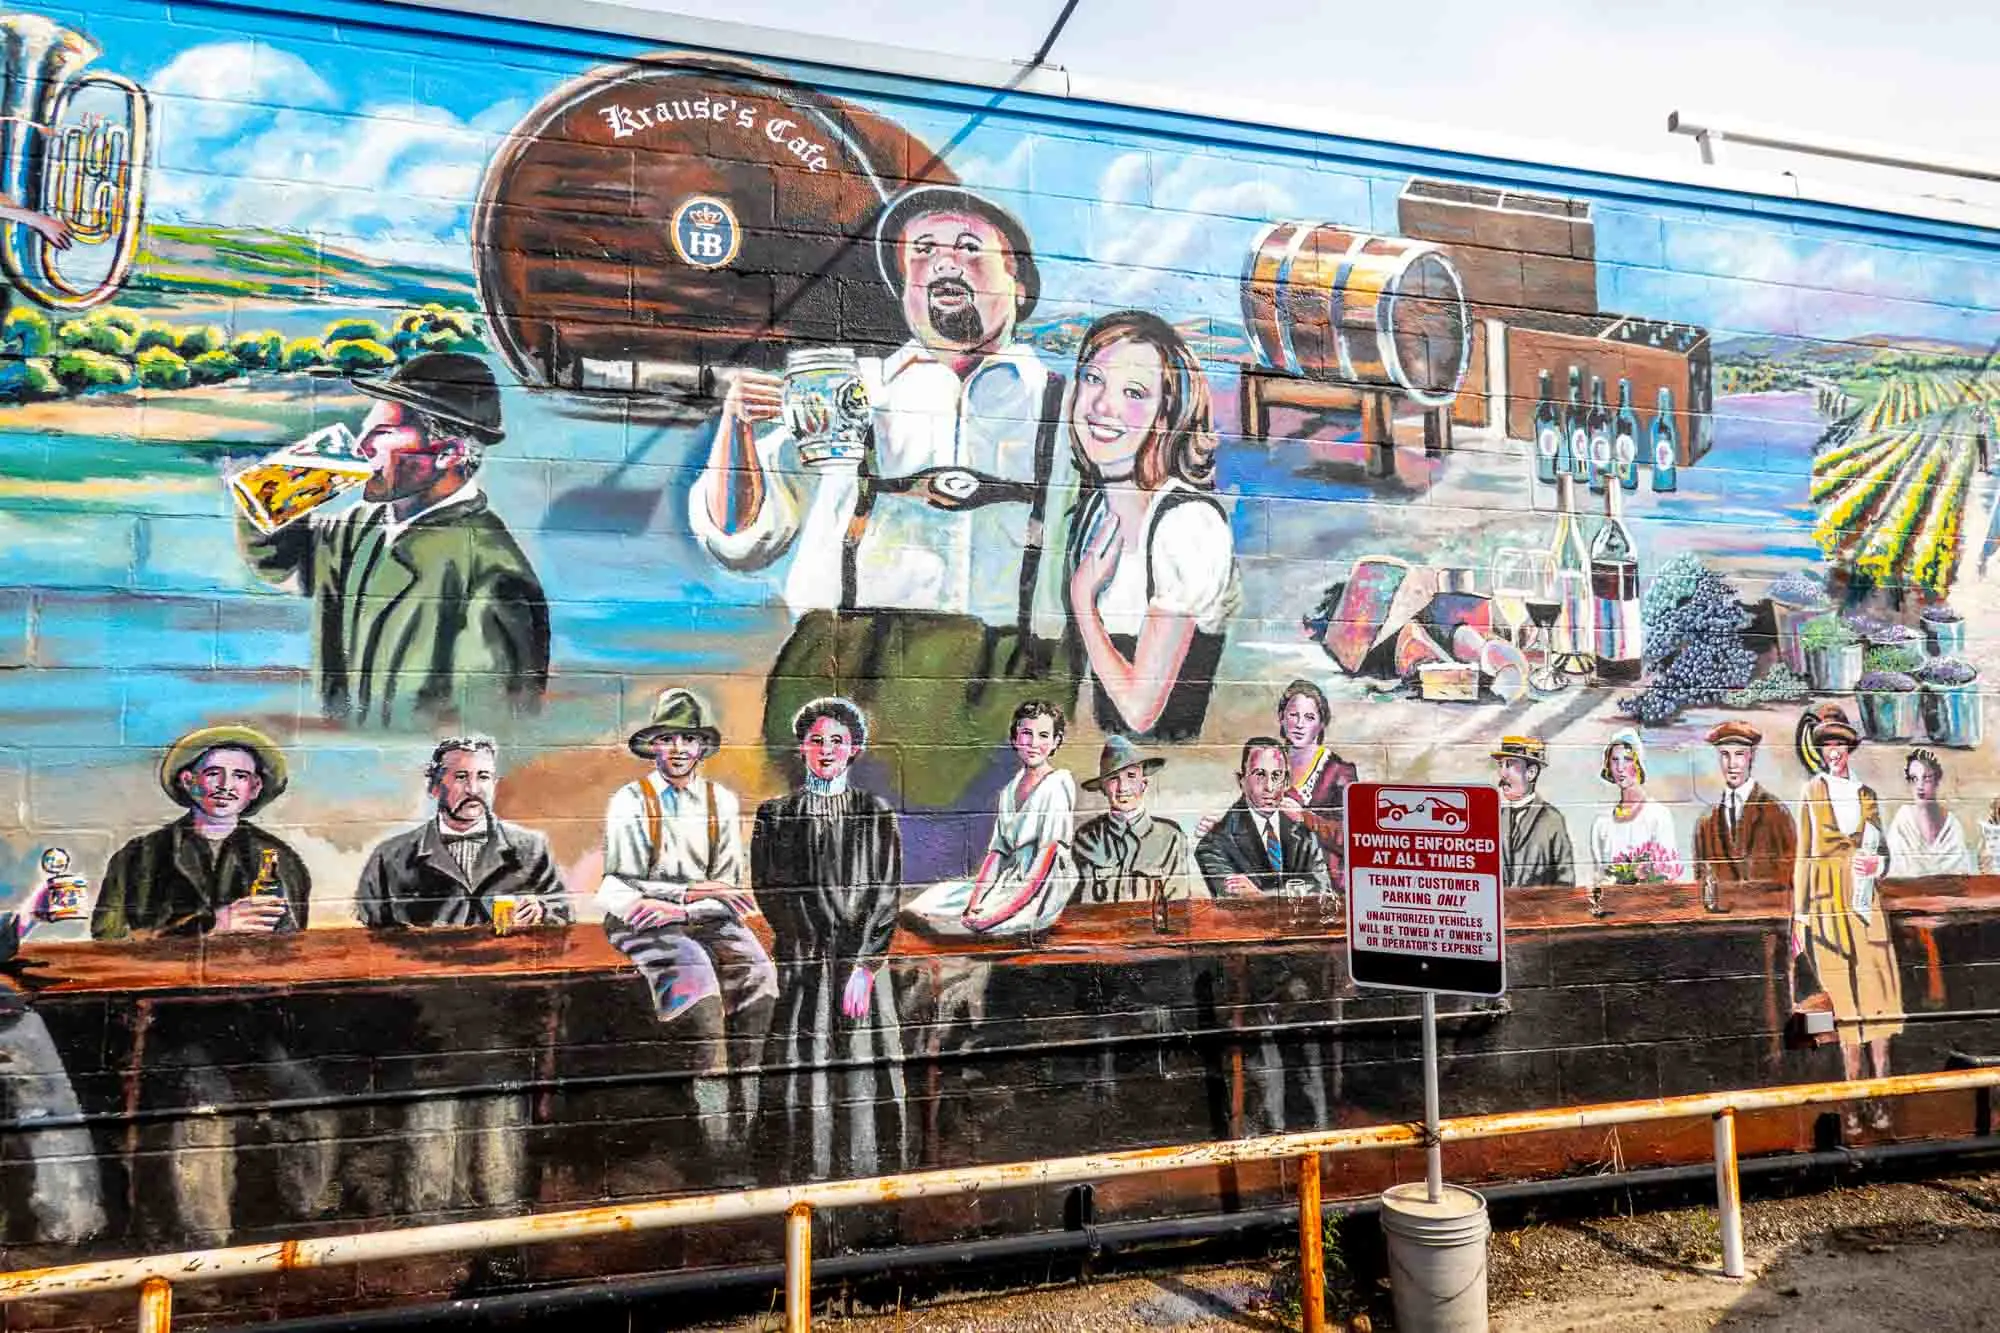 Mural showing people in classic German clothing and a beer barrel labeled "Krause's Cafe"